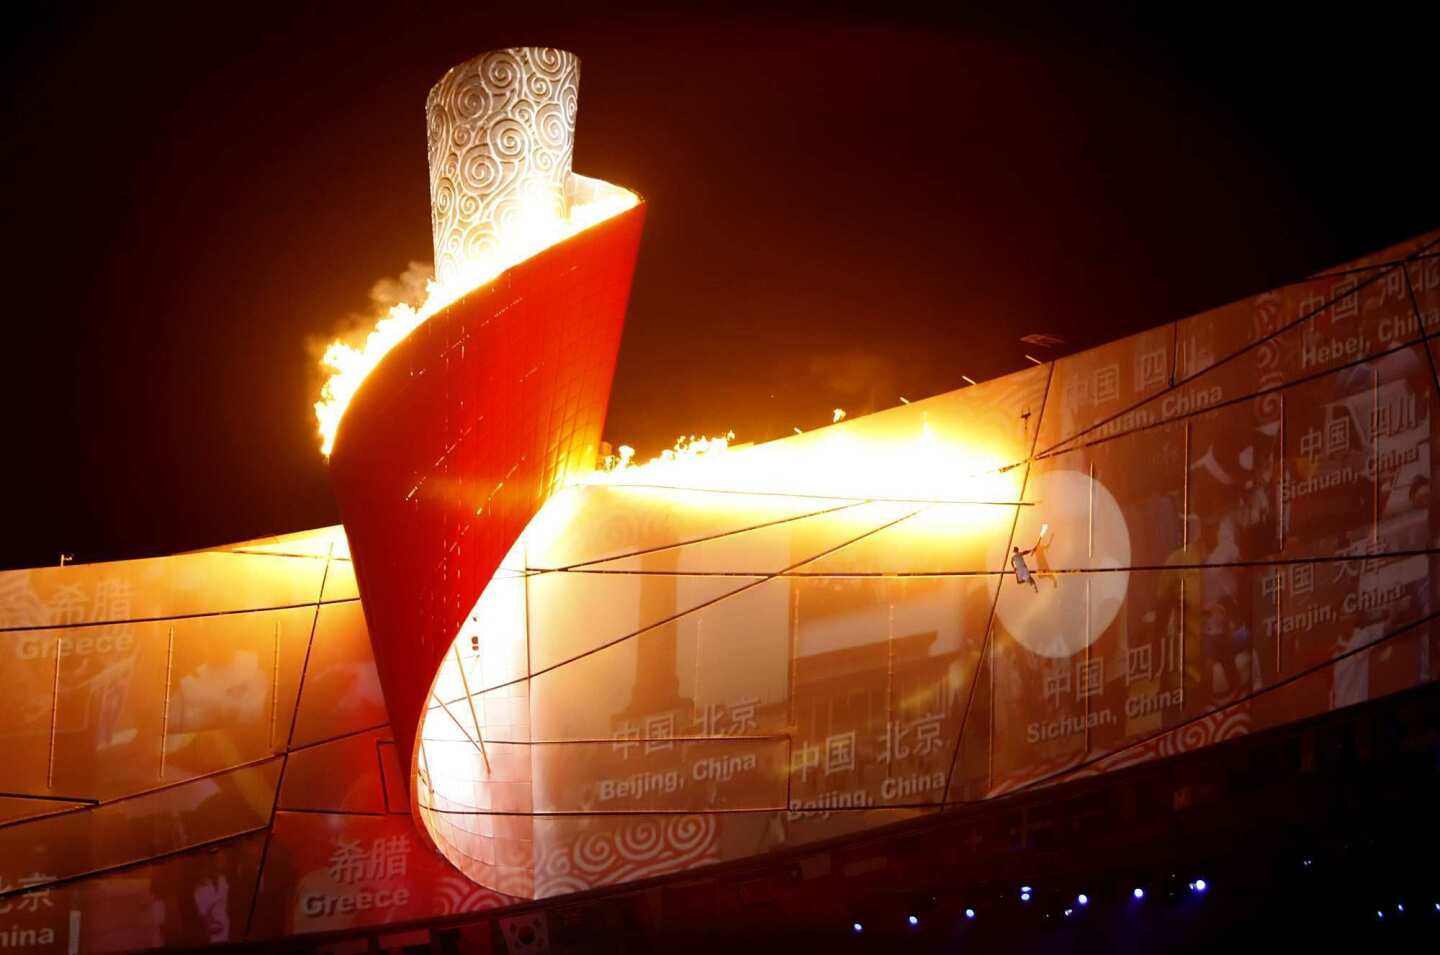 Suspended by a harness, 1984 Olympic champion gymnast Li Ning, 45, moves along the stadium's upper level to light the cauldron during the Opening Ceremony at the Beijing National Stadium for the 2008 Summer Olympics.